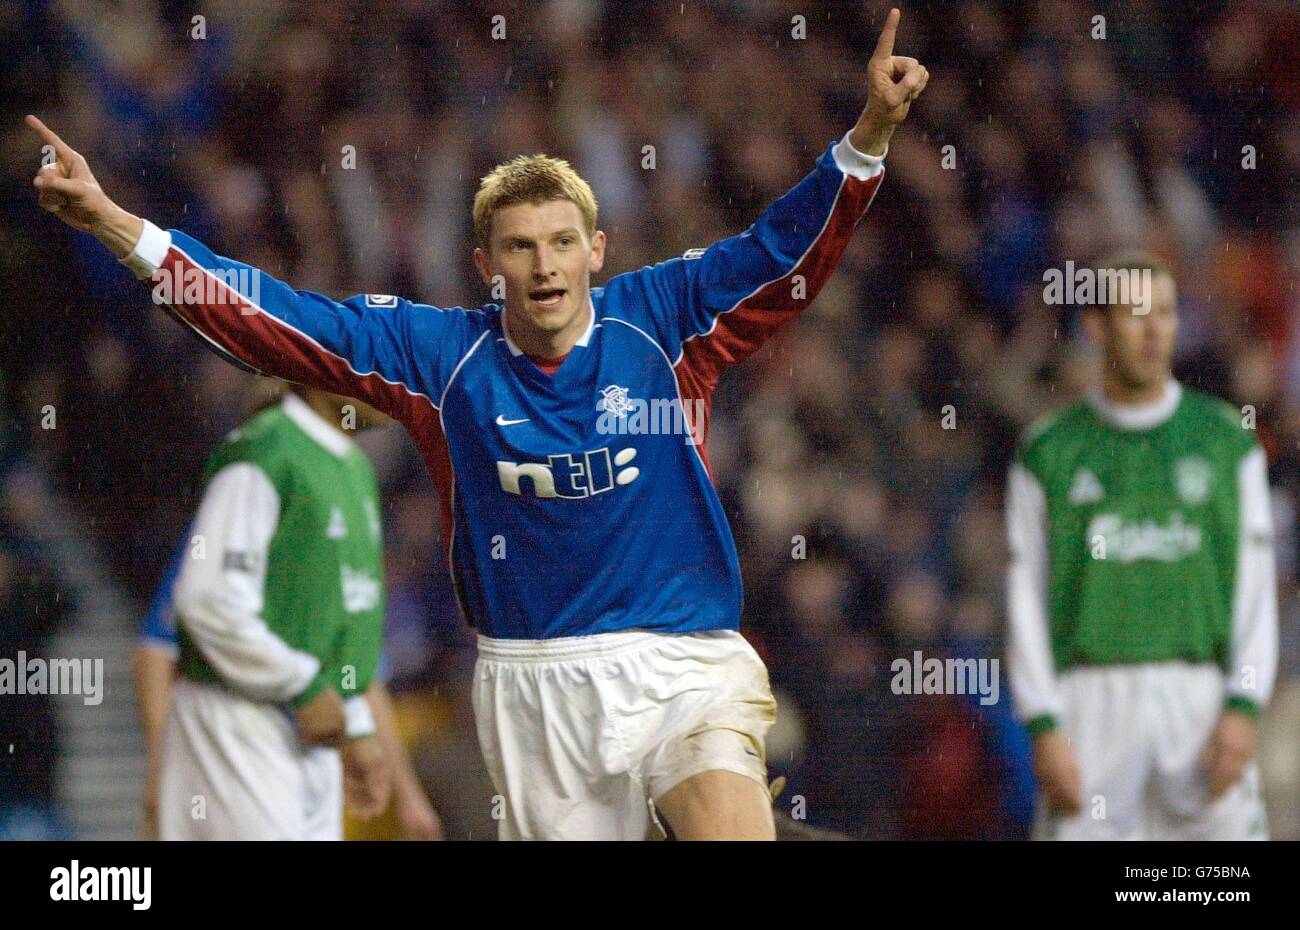 Rangers Tore Andre Flo celebrates his second goal to put Rangers on their way to a 4-1 win in their Tennents Scottish FA Cup 4th round match at Rangers' Ibrox stadium in Glasgow. Stock Photo